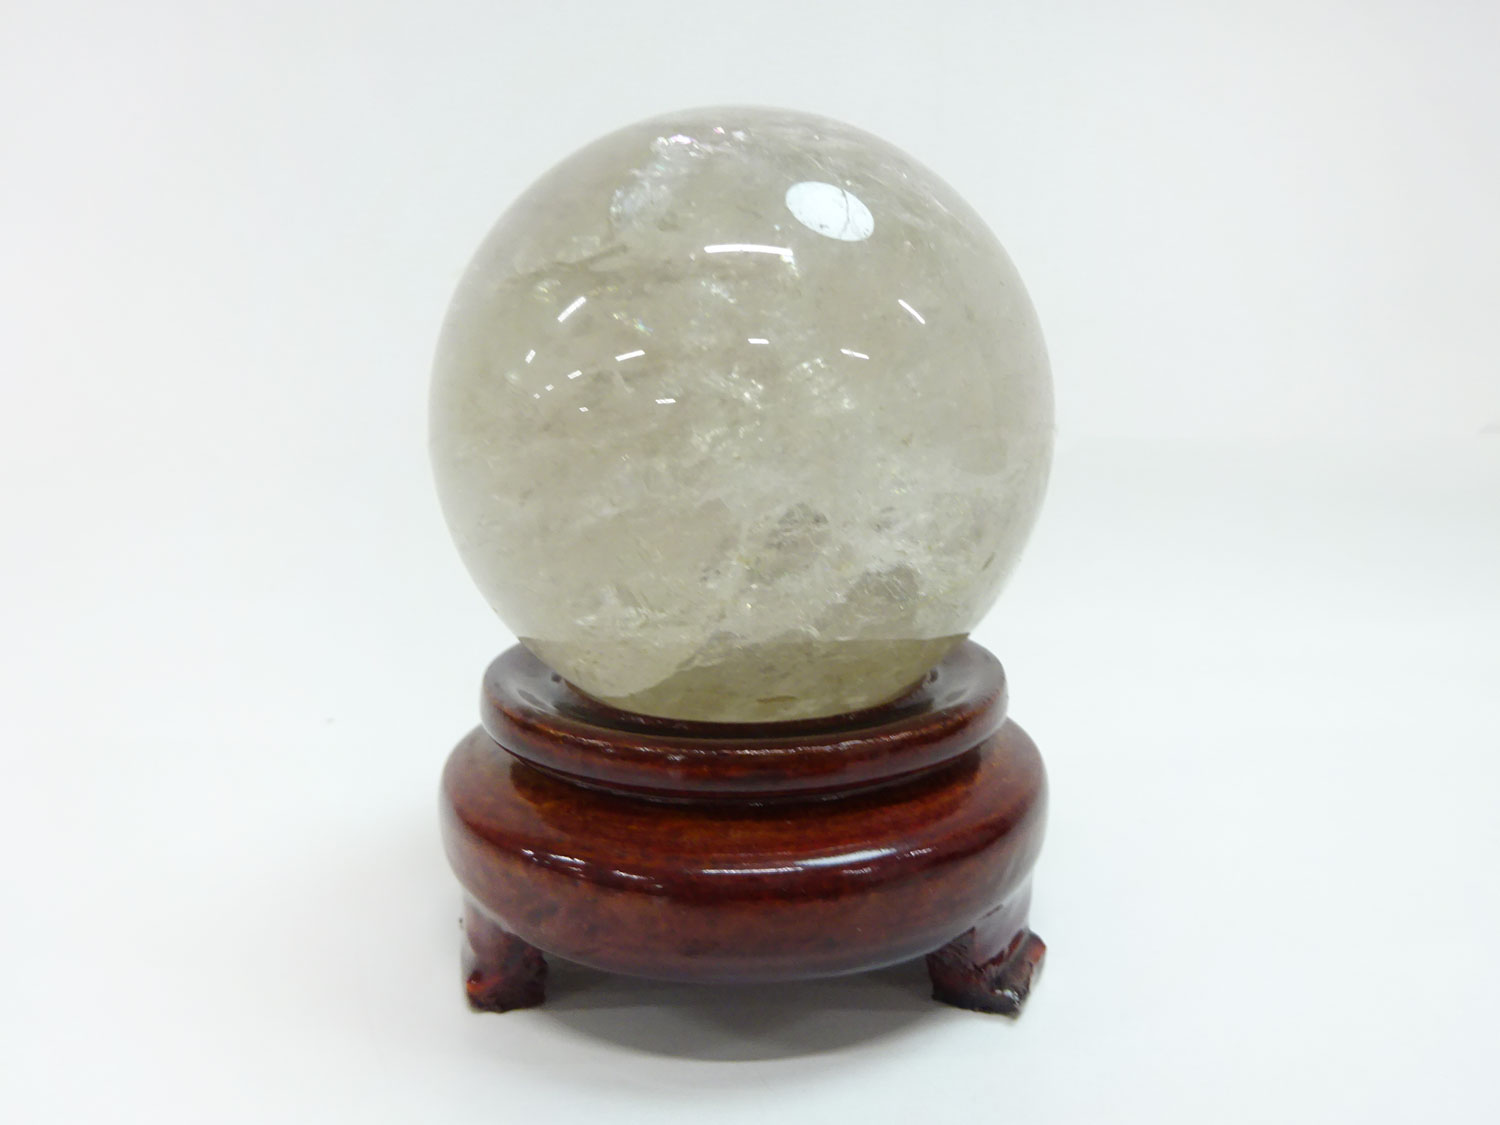 JAPANESE ORNAMENT / NATURAL CRYSTAL & MINERAL (454.56g) / HEALING CRYSTAL SPHERE